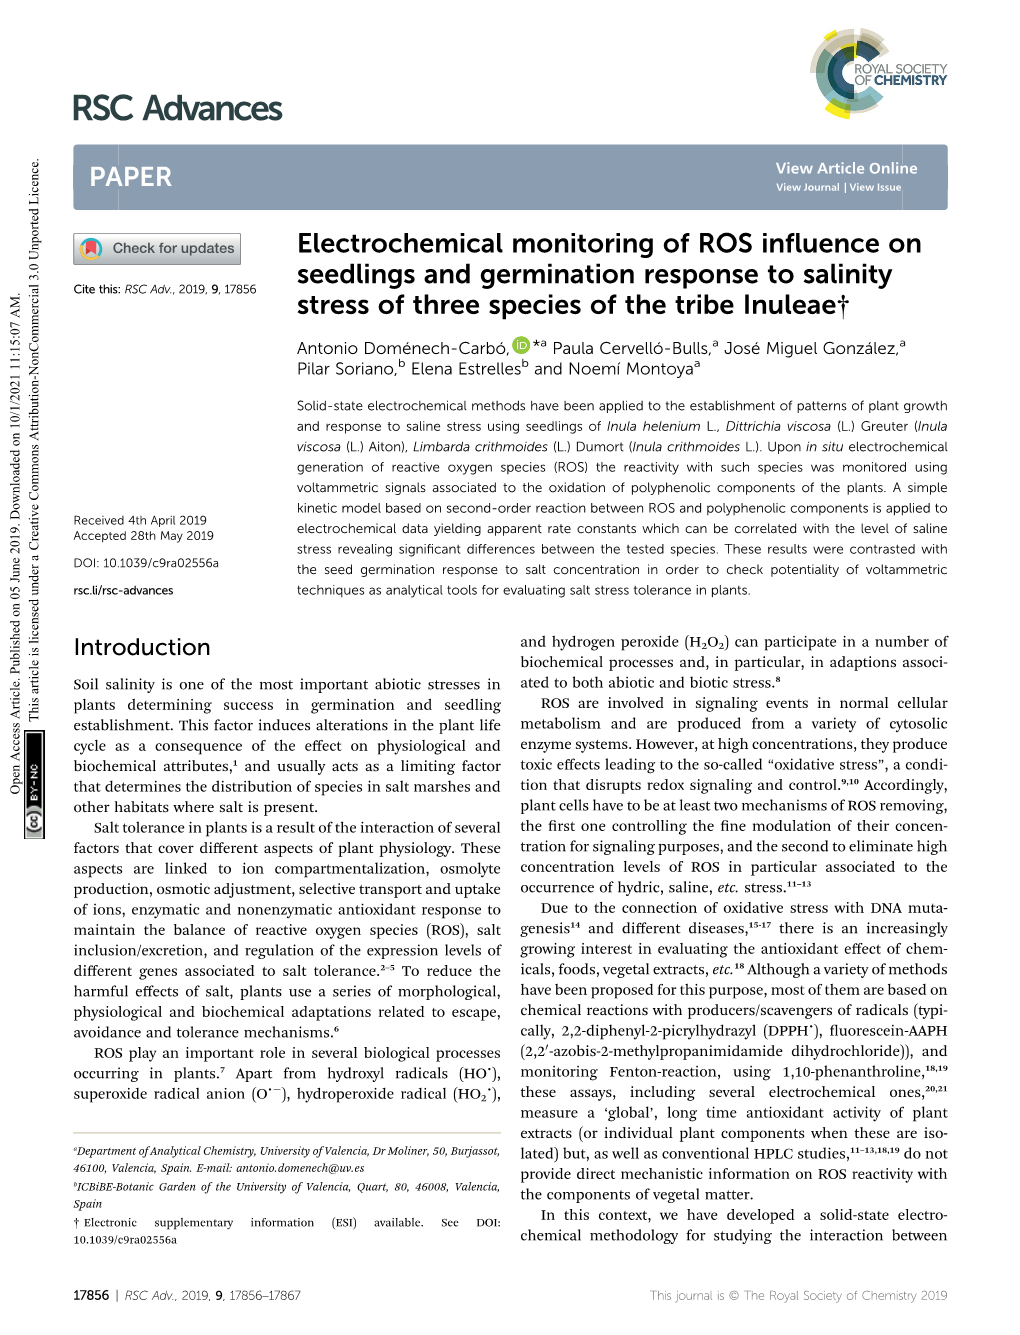 Electrochemical Monitoring of ROS Influence on Seedlings And